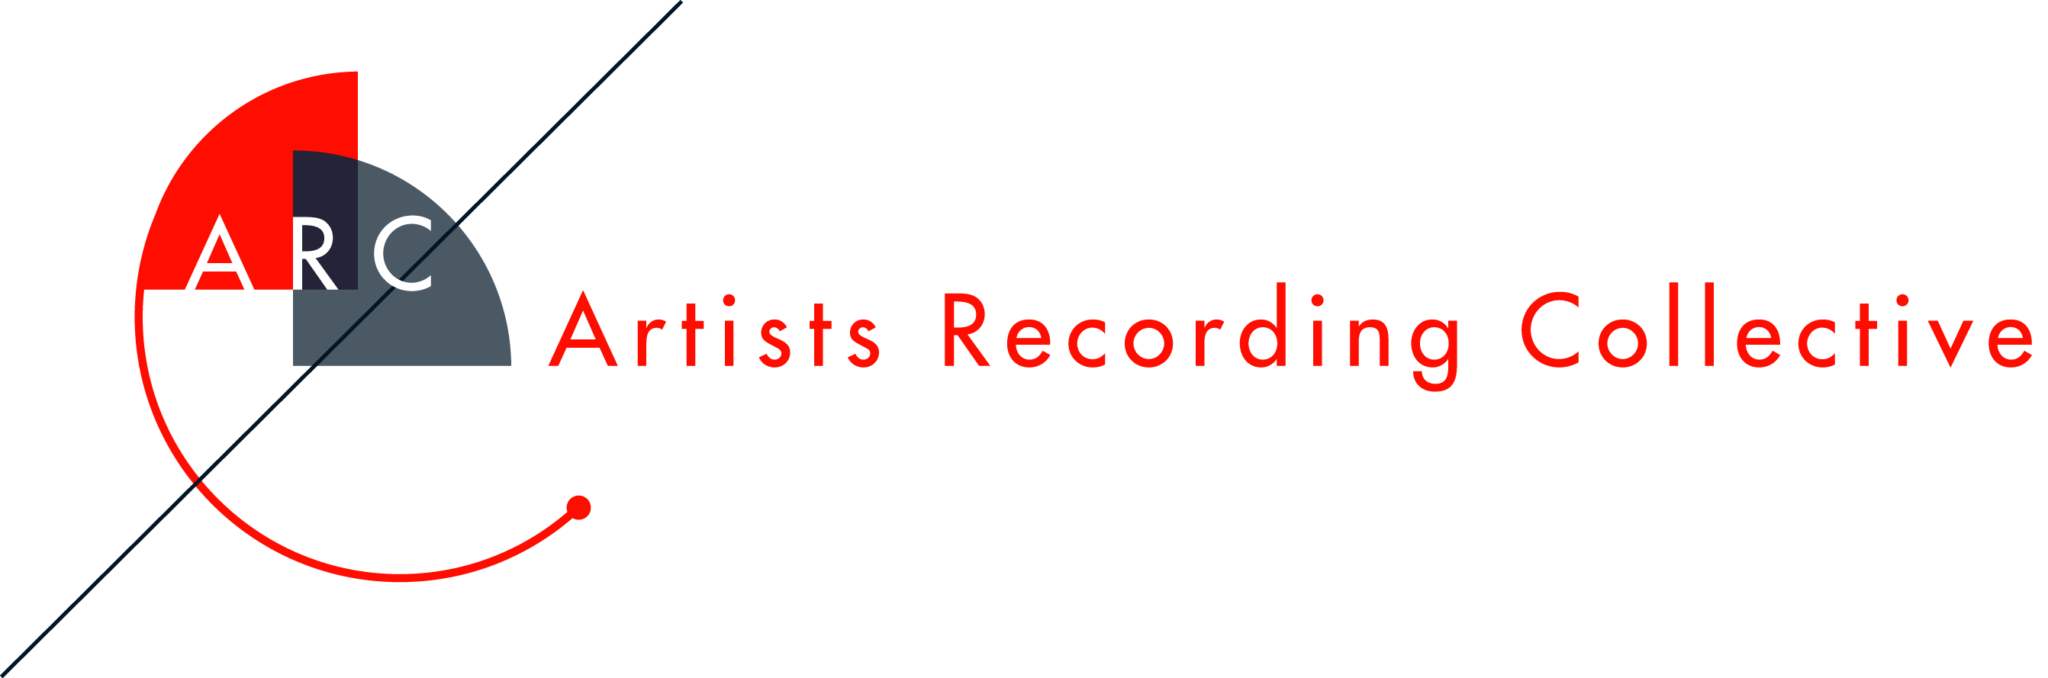 ARTISTS RECORDING COLLECTIVE ARC RECORD LABEL USA